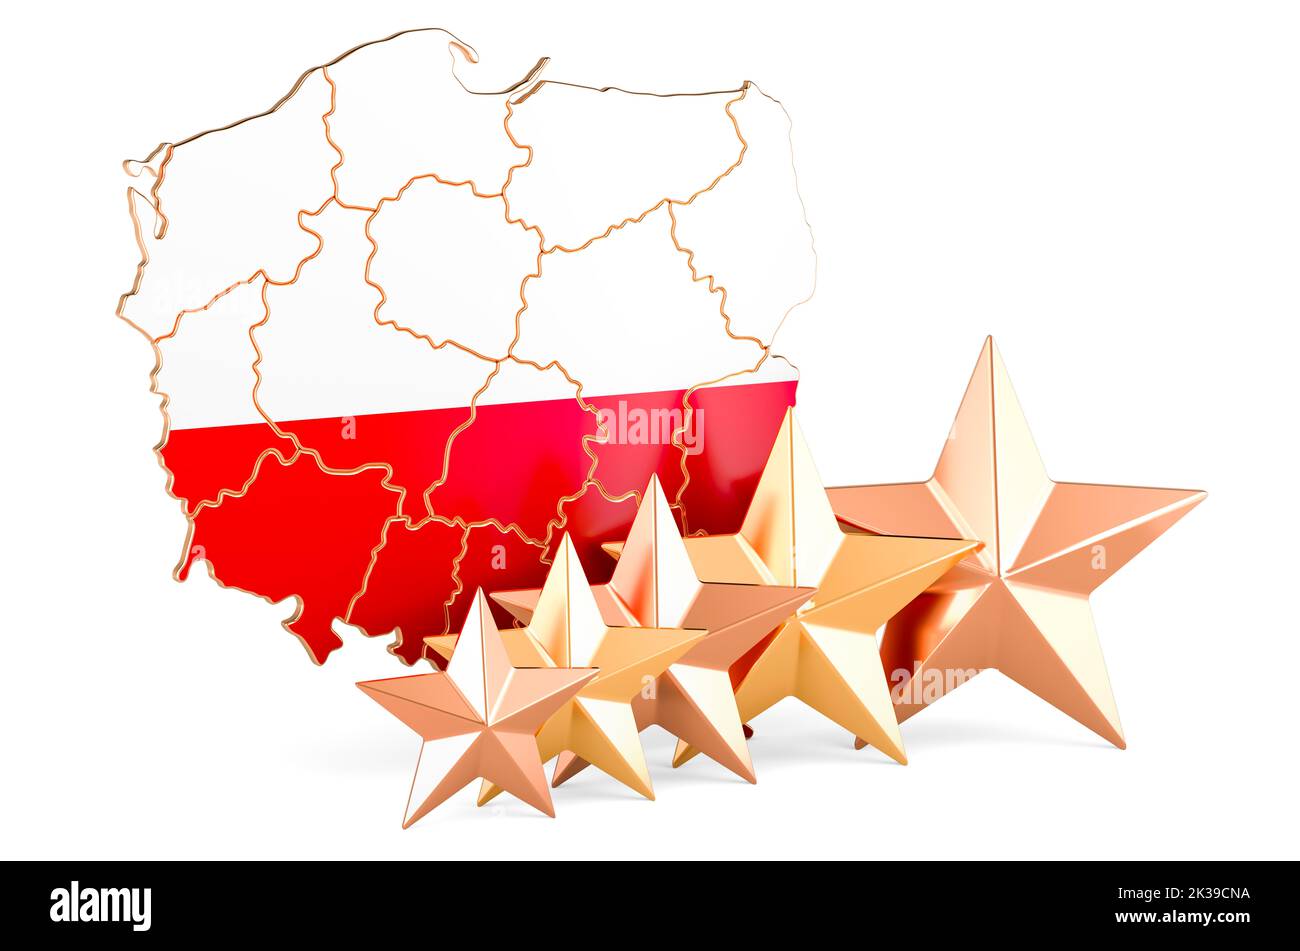 Polish map with five stars. Rating, quality, service in Poland. 3D rendering isolated on white background Stock Photo